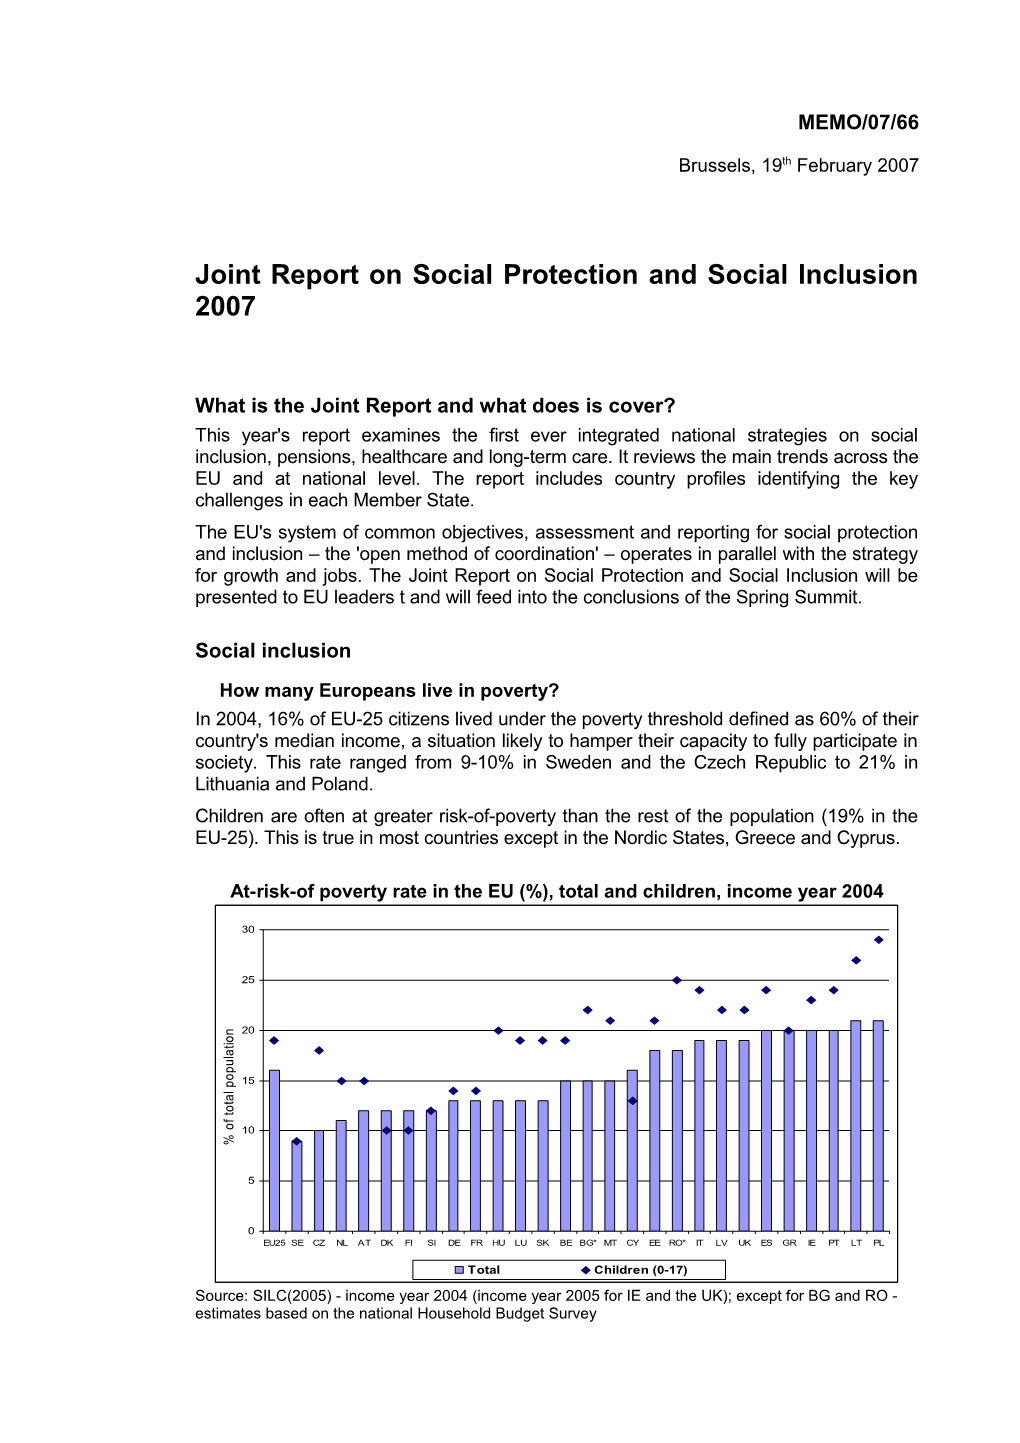 Joint Report on Social Protection and Social Inclusion 2007